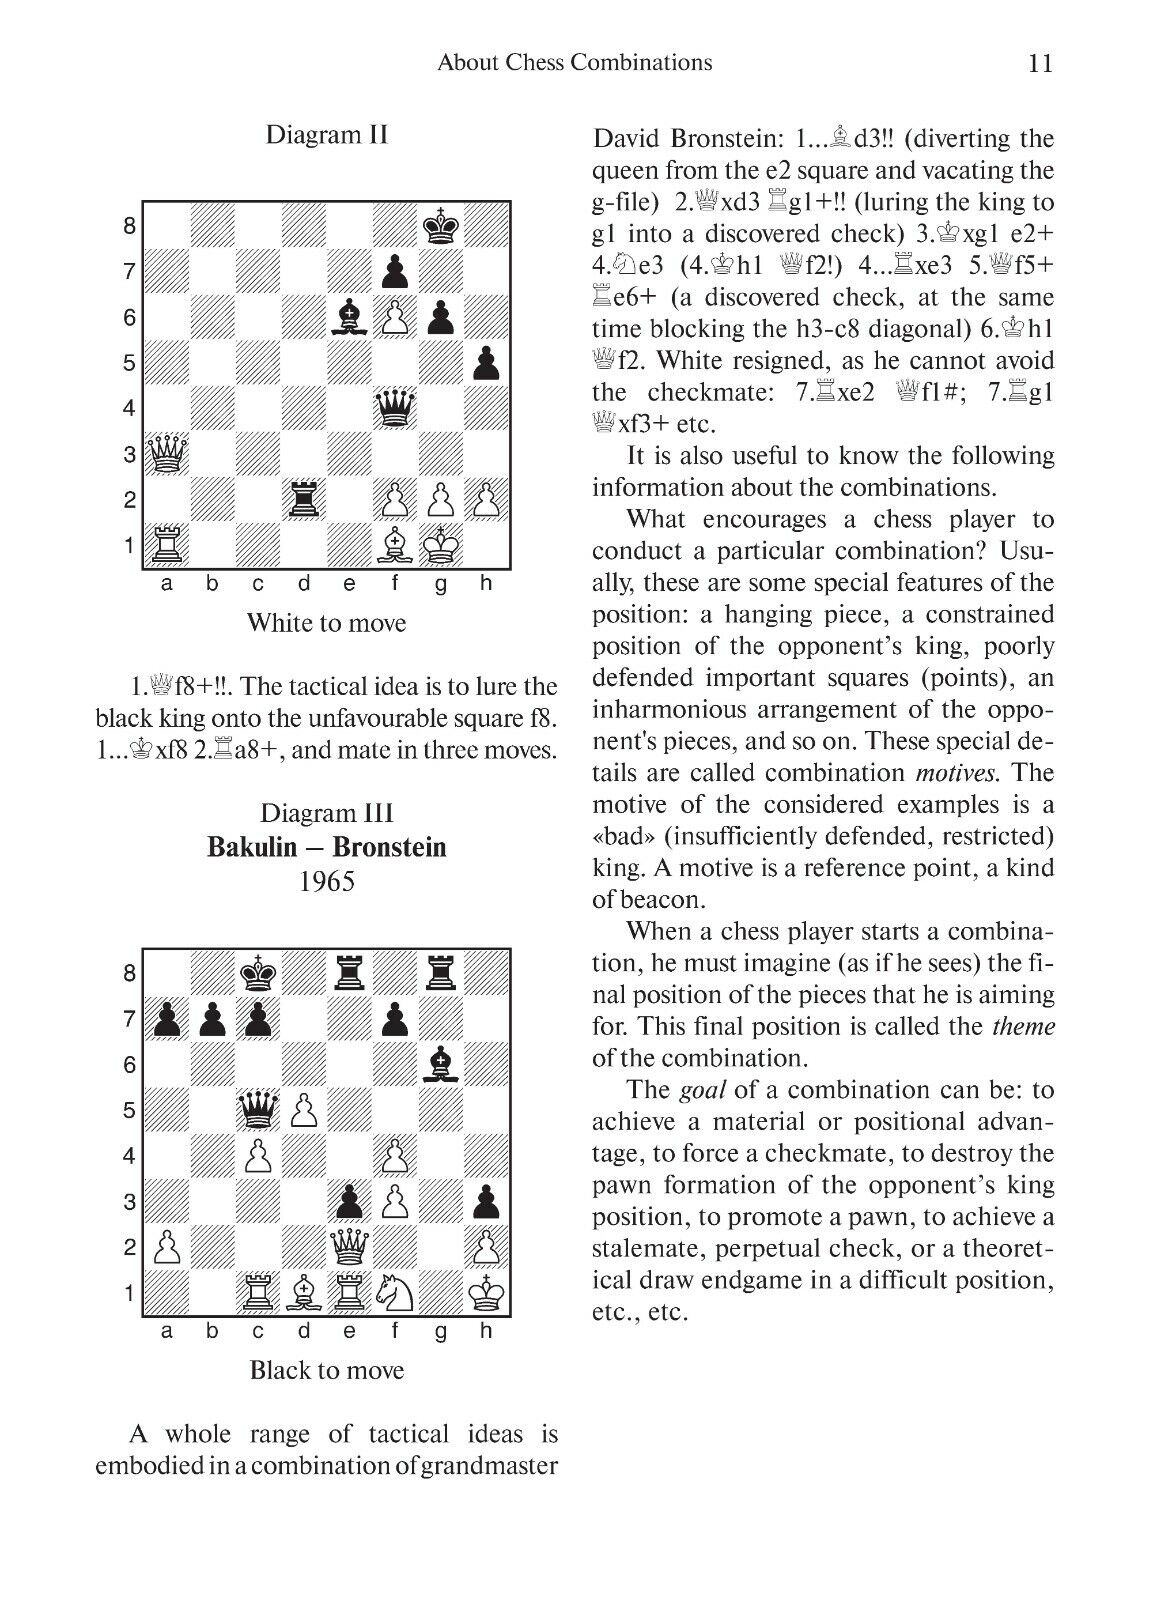 10970.Book: Manual of Chess Combinations. Chess Nuts. 400 Tactical Exercises. 2021